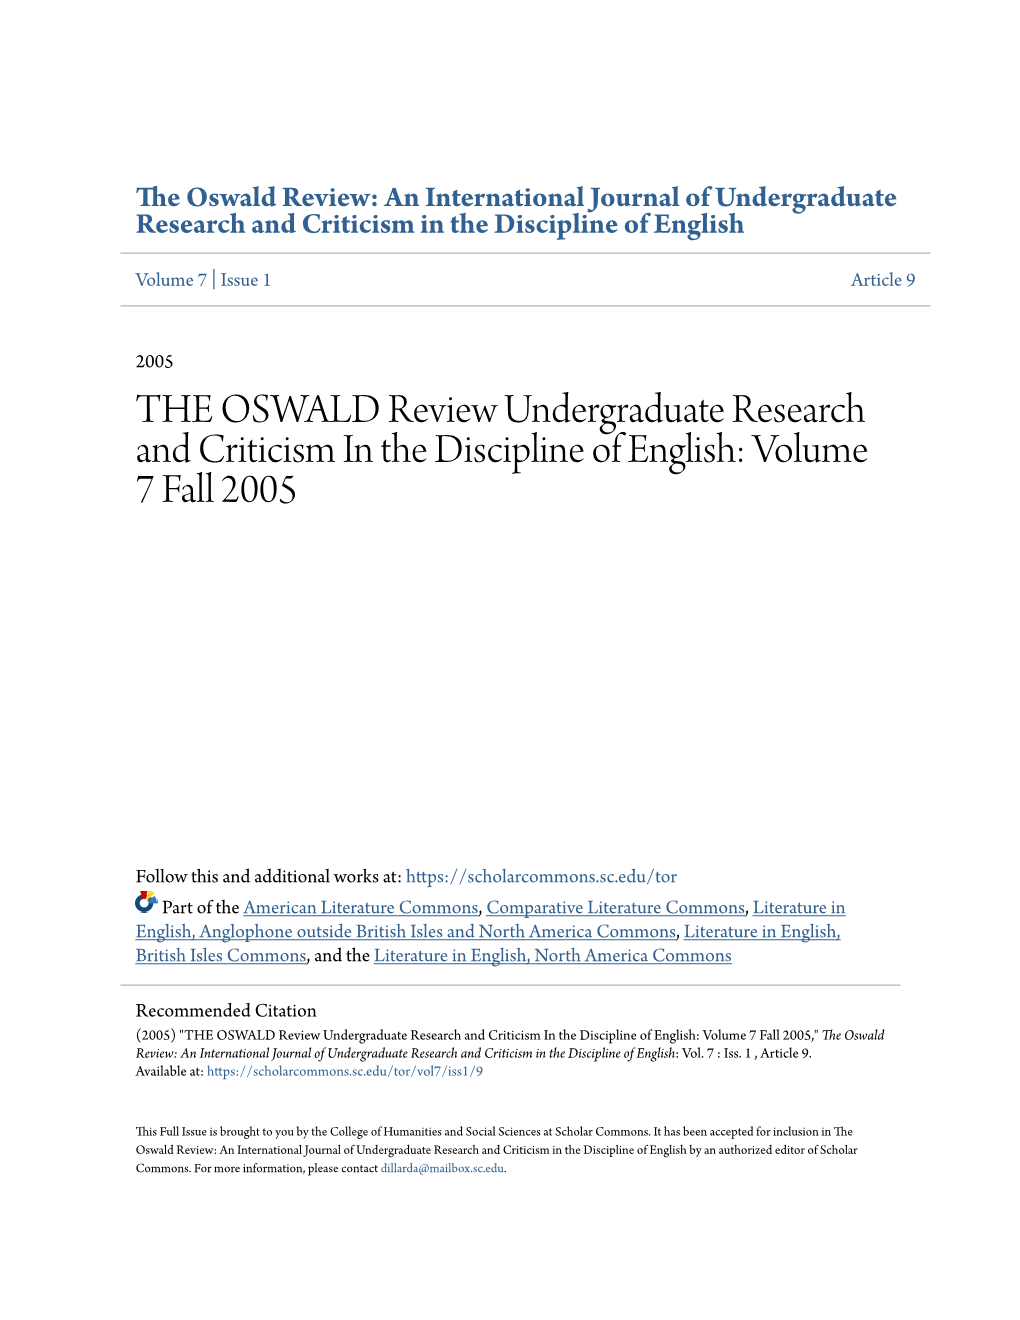 THE OSWALD Review Undergraduate Research and Criticism in the Discipline of English: Volume 7 Fall 2005